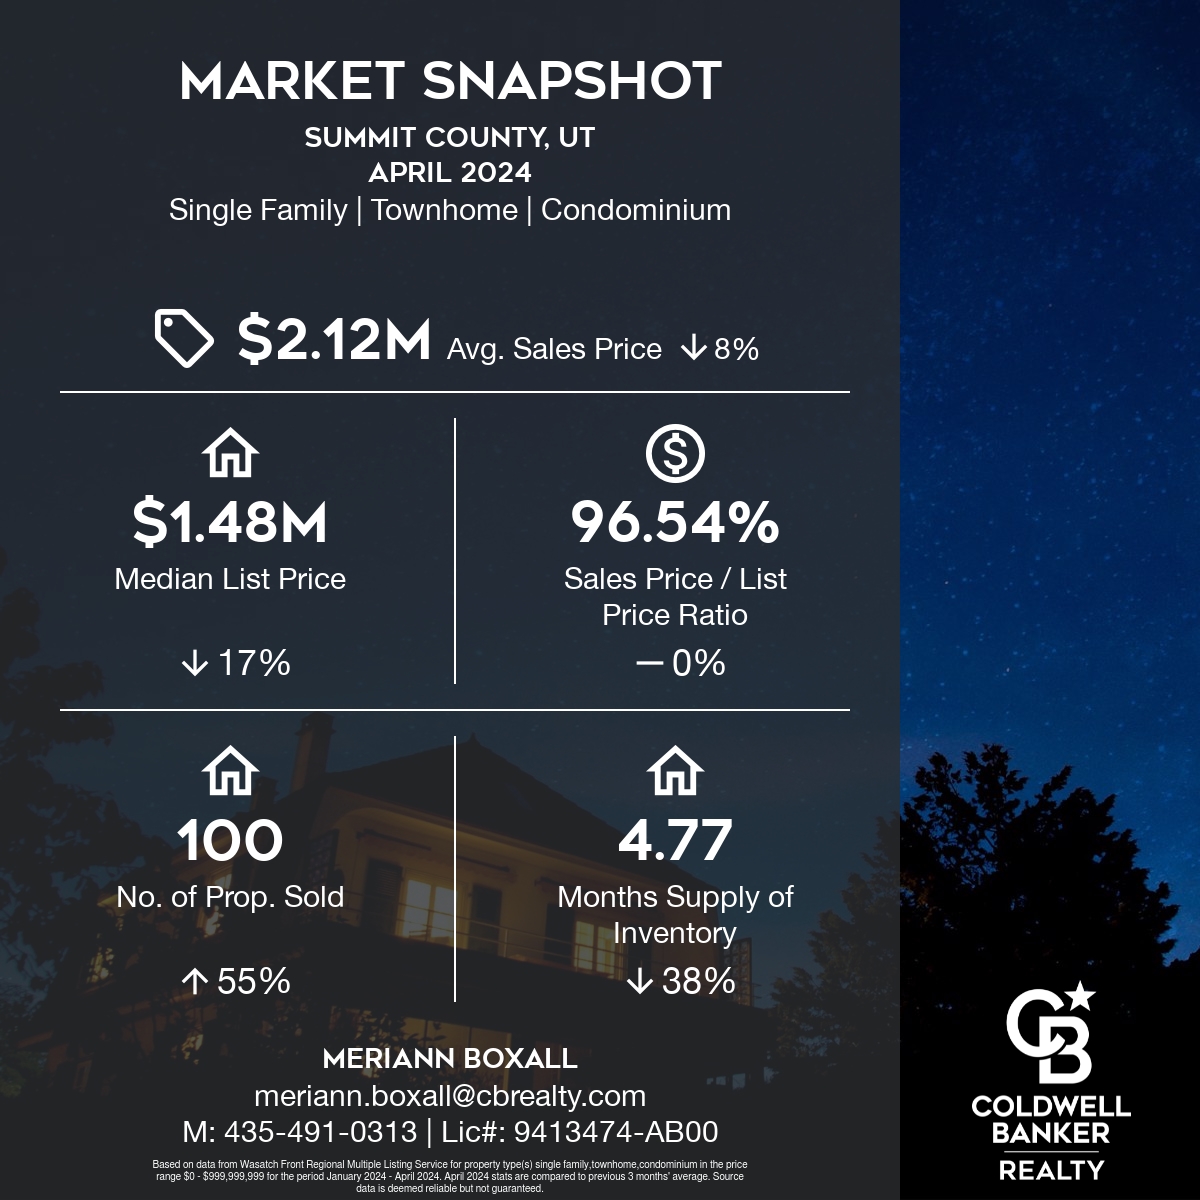 Summit County Market Report for April 2024.  It's shoulder season and things have slowed down in Summit County.  Both sales and list price are down as well as inventory.  #summitcounty #parkcity #utah